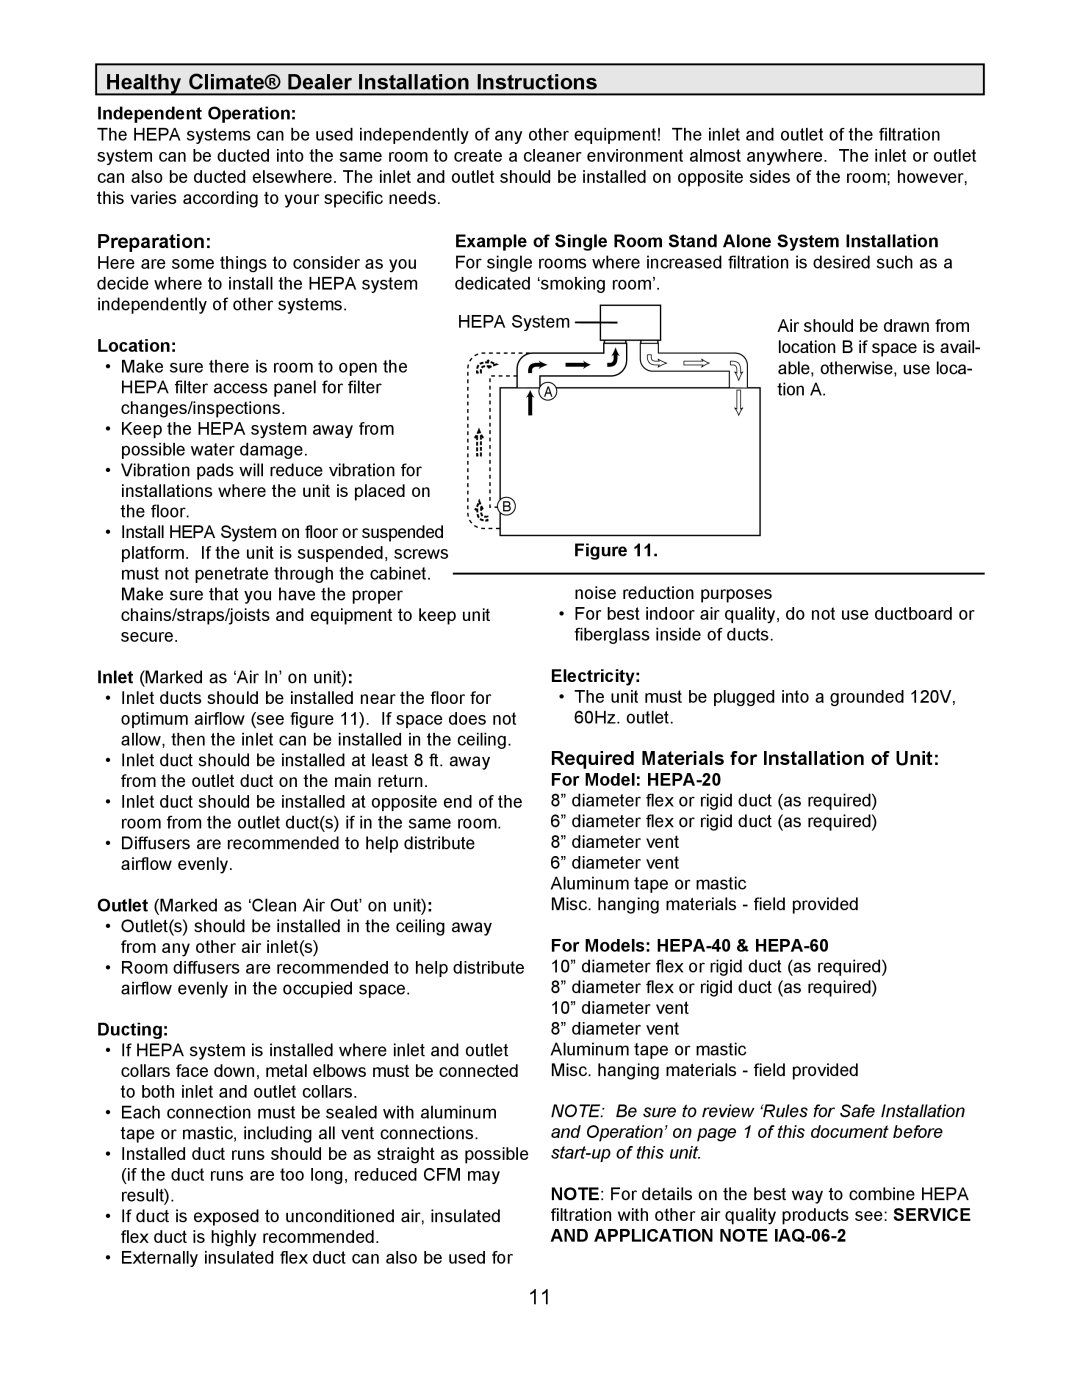 Lennox International Inc 504 Healthy Climate Dealer Installation Instructions, Preparation, Independent Operation, Ducting 